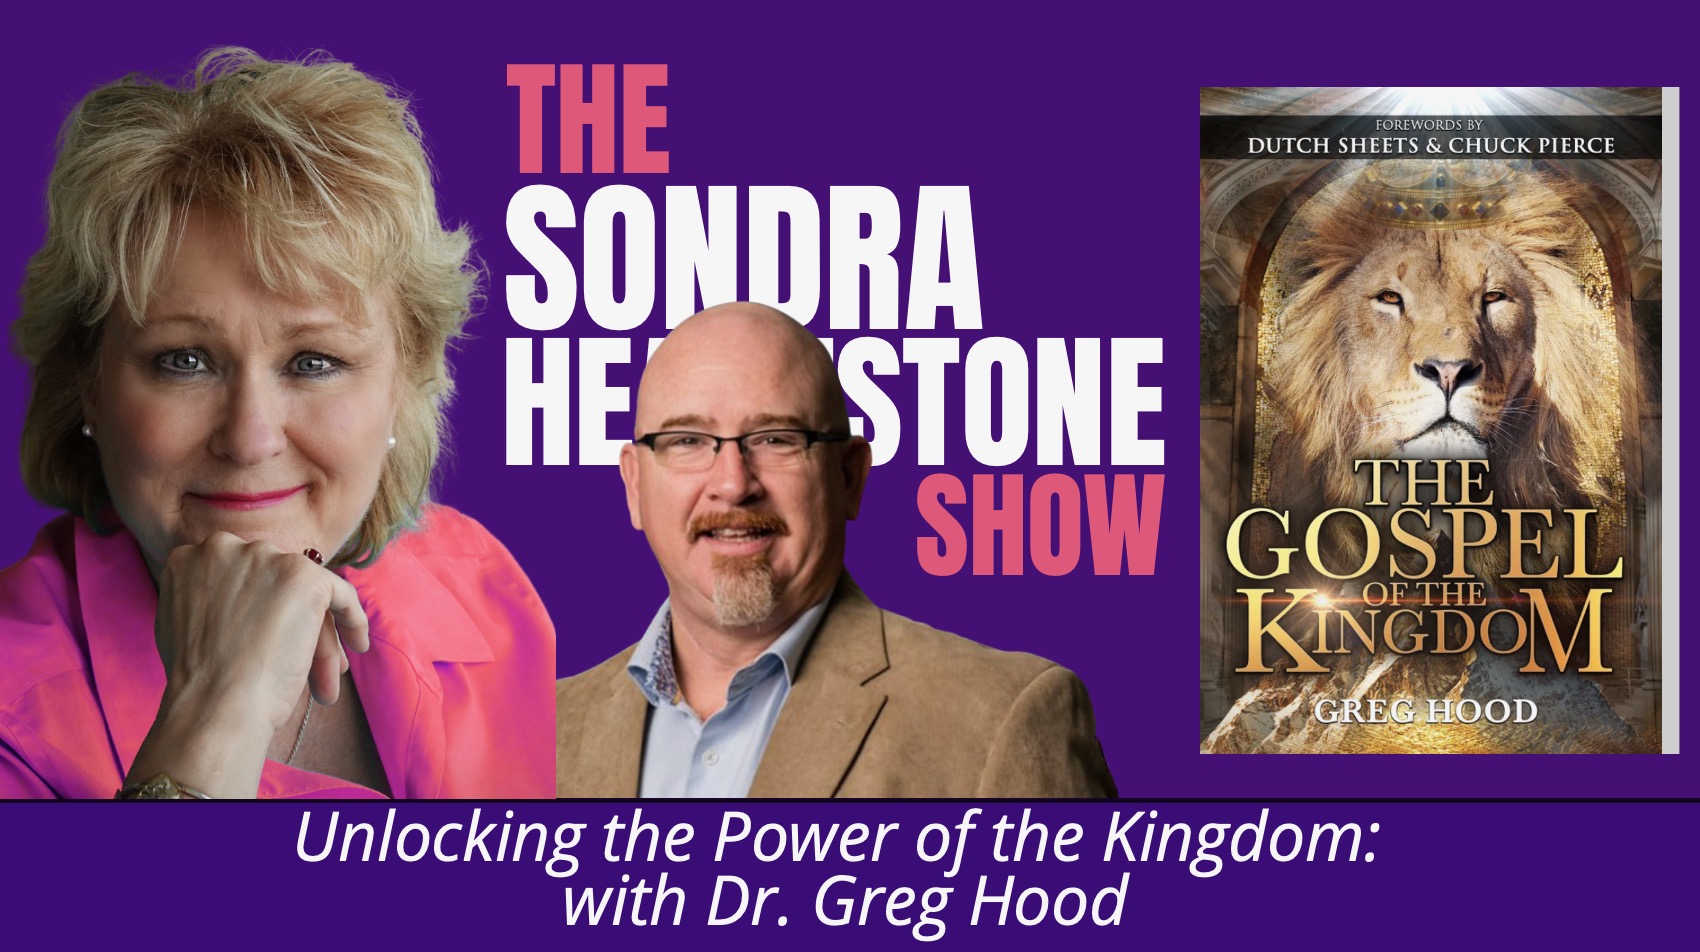 Unlocking the Power of the Kingdom: with Dr. Greg Hood